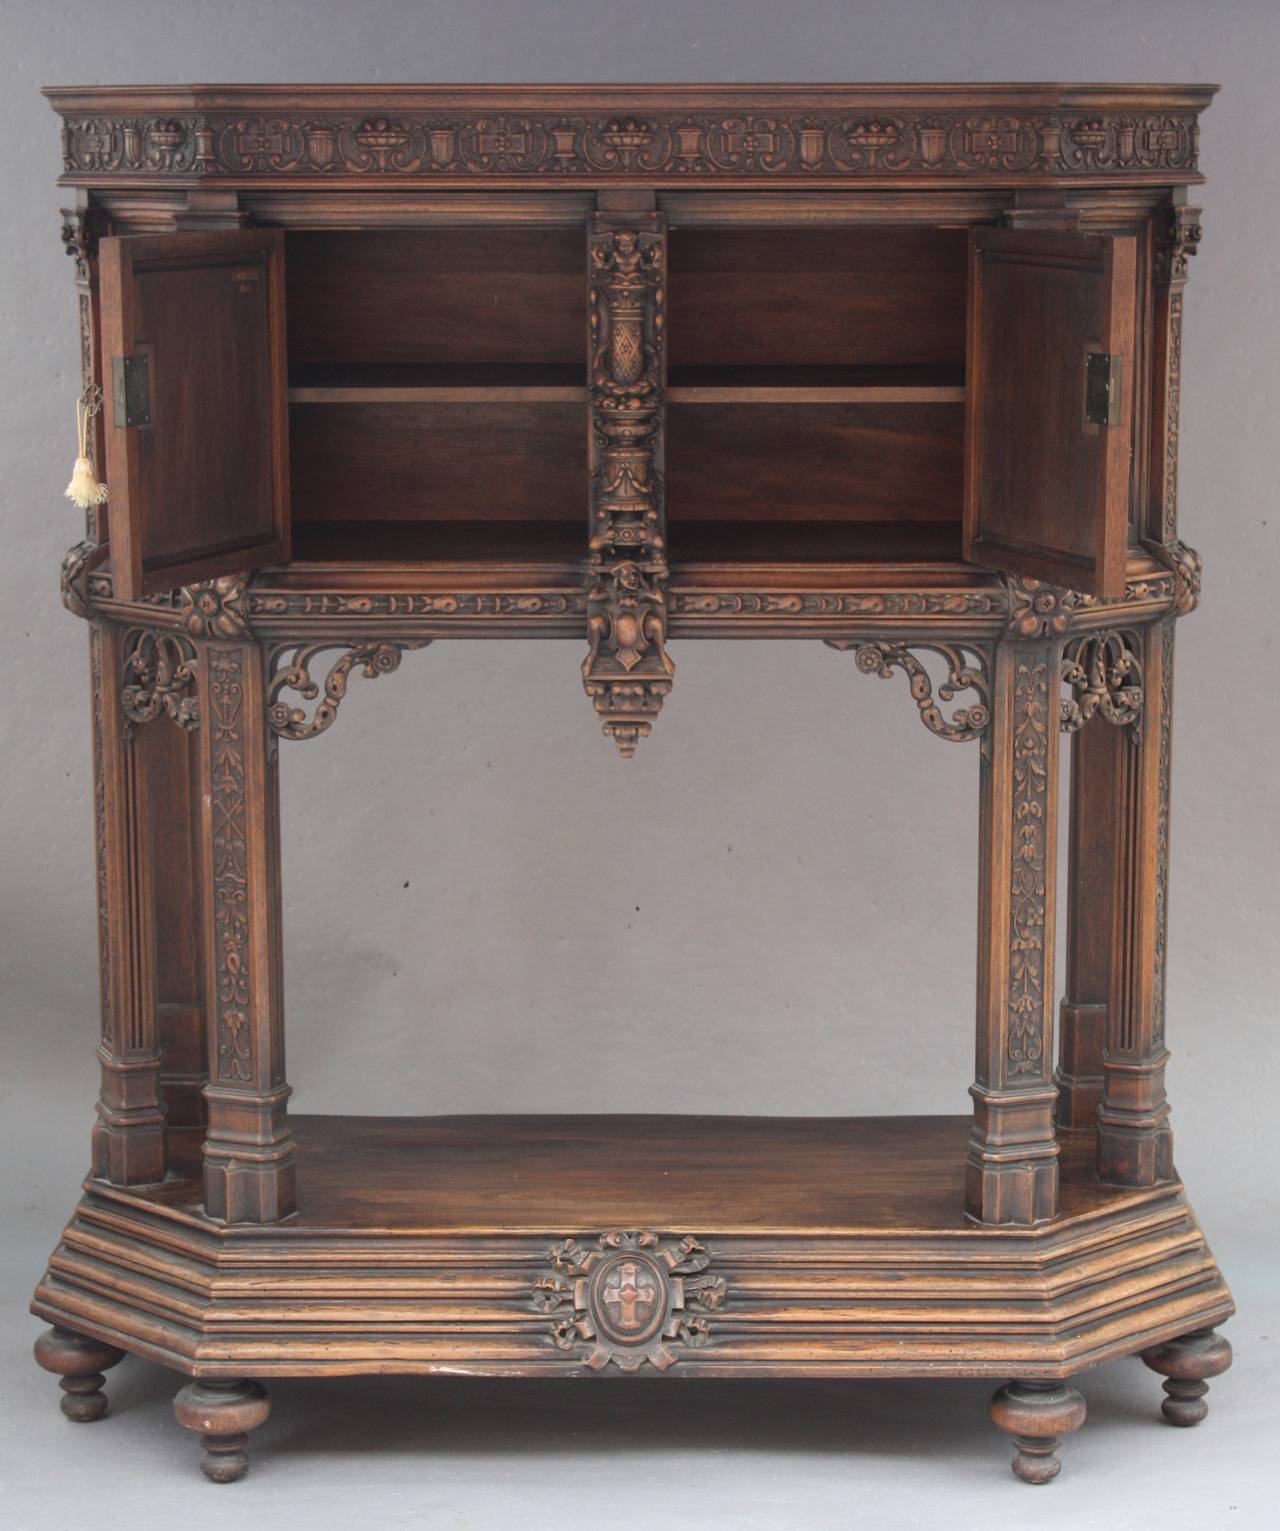 Spanish Colonial Fantastic Tall Cabinet from Montecito Estate